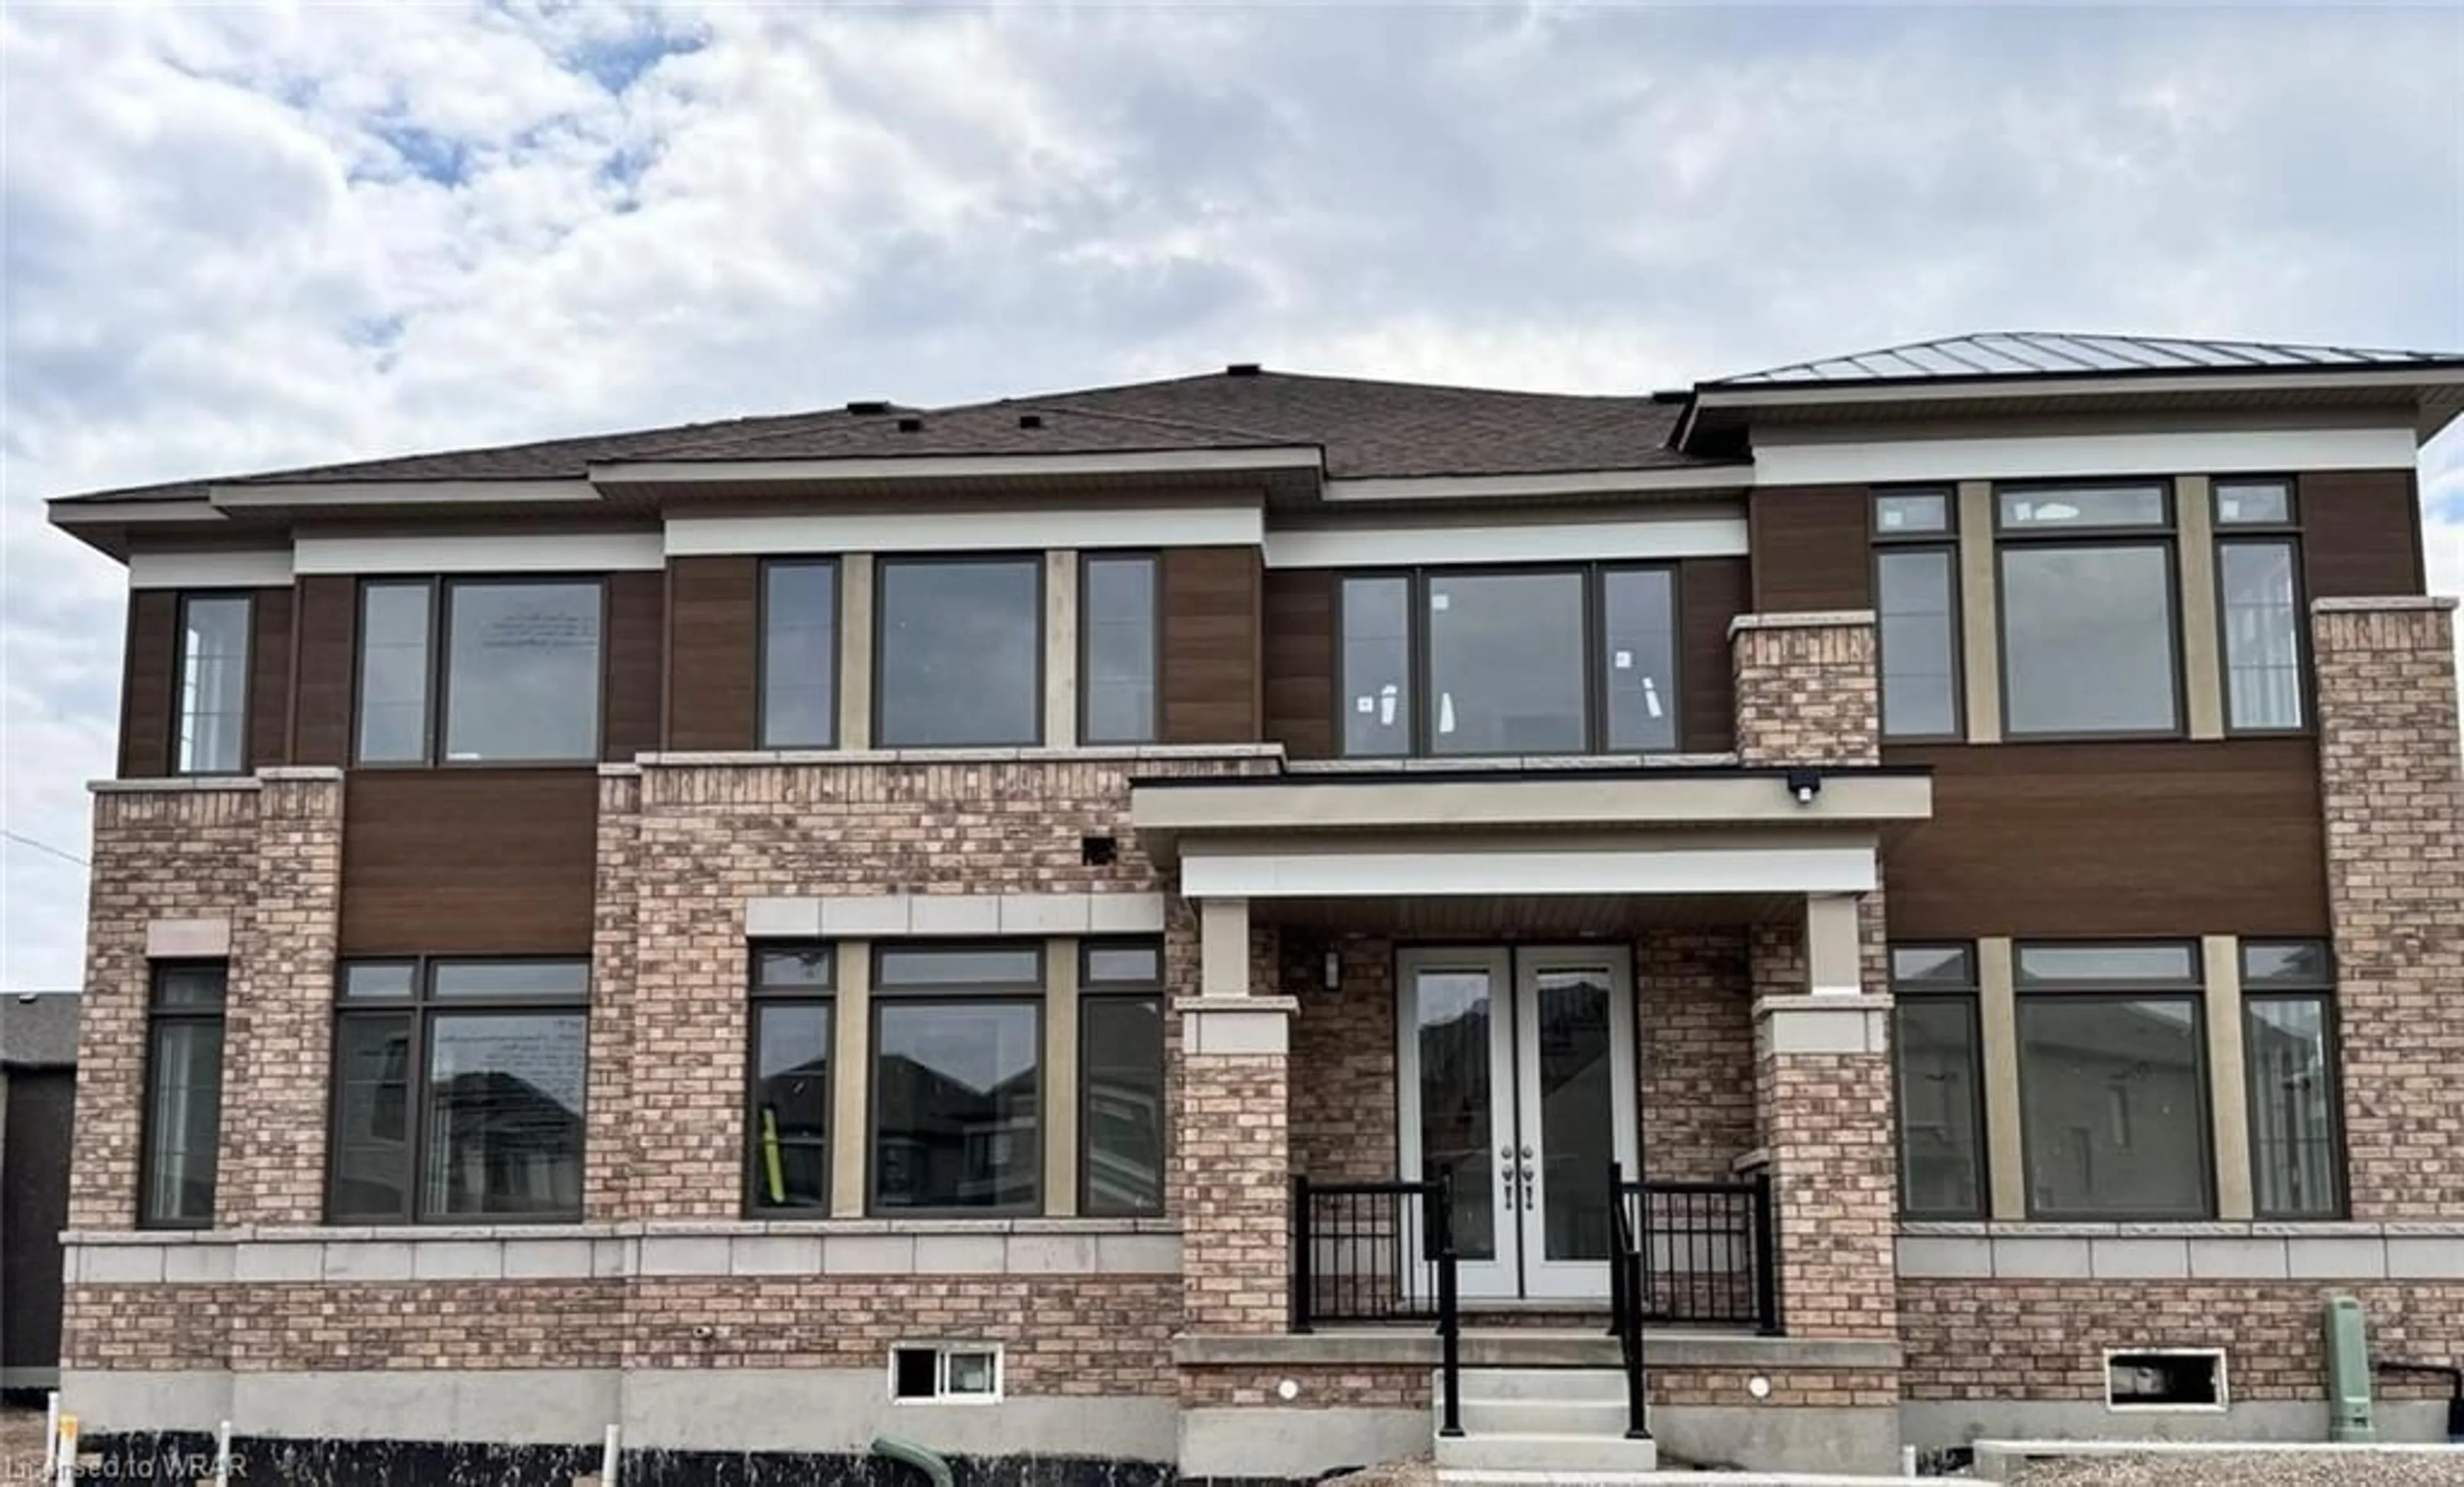 Home with brick exterior material for 15 Blacklock St #33, Cambridge Ontario N1S 0E6